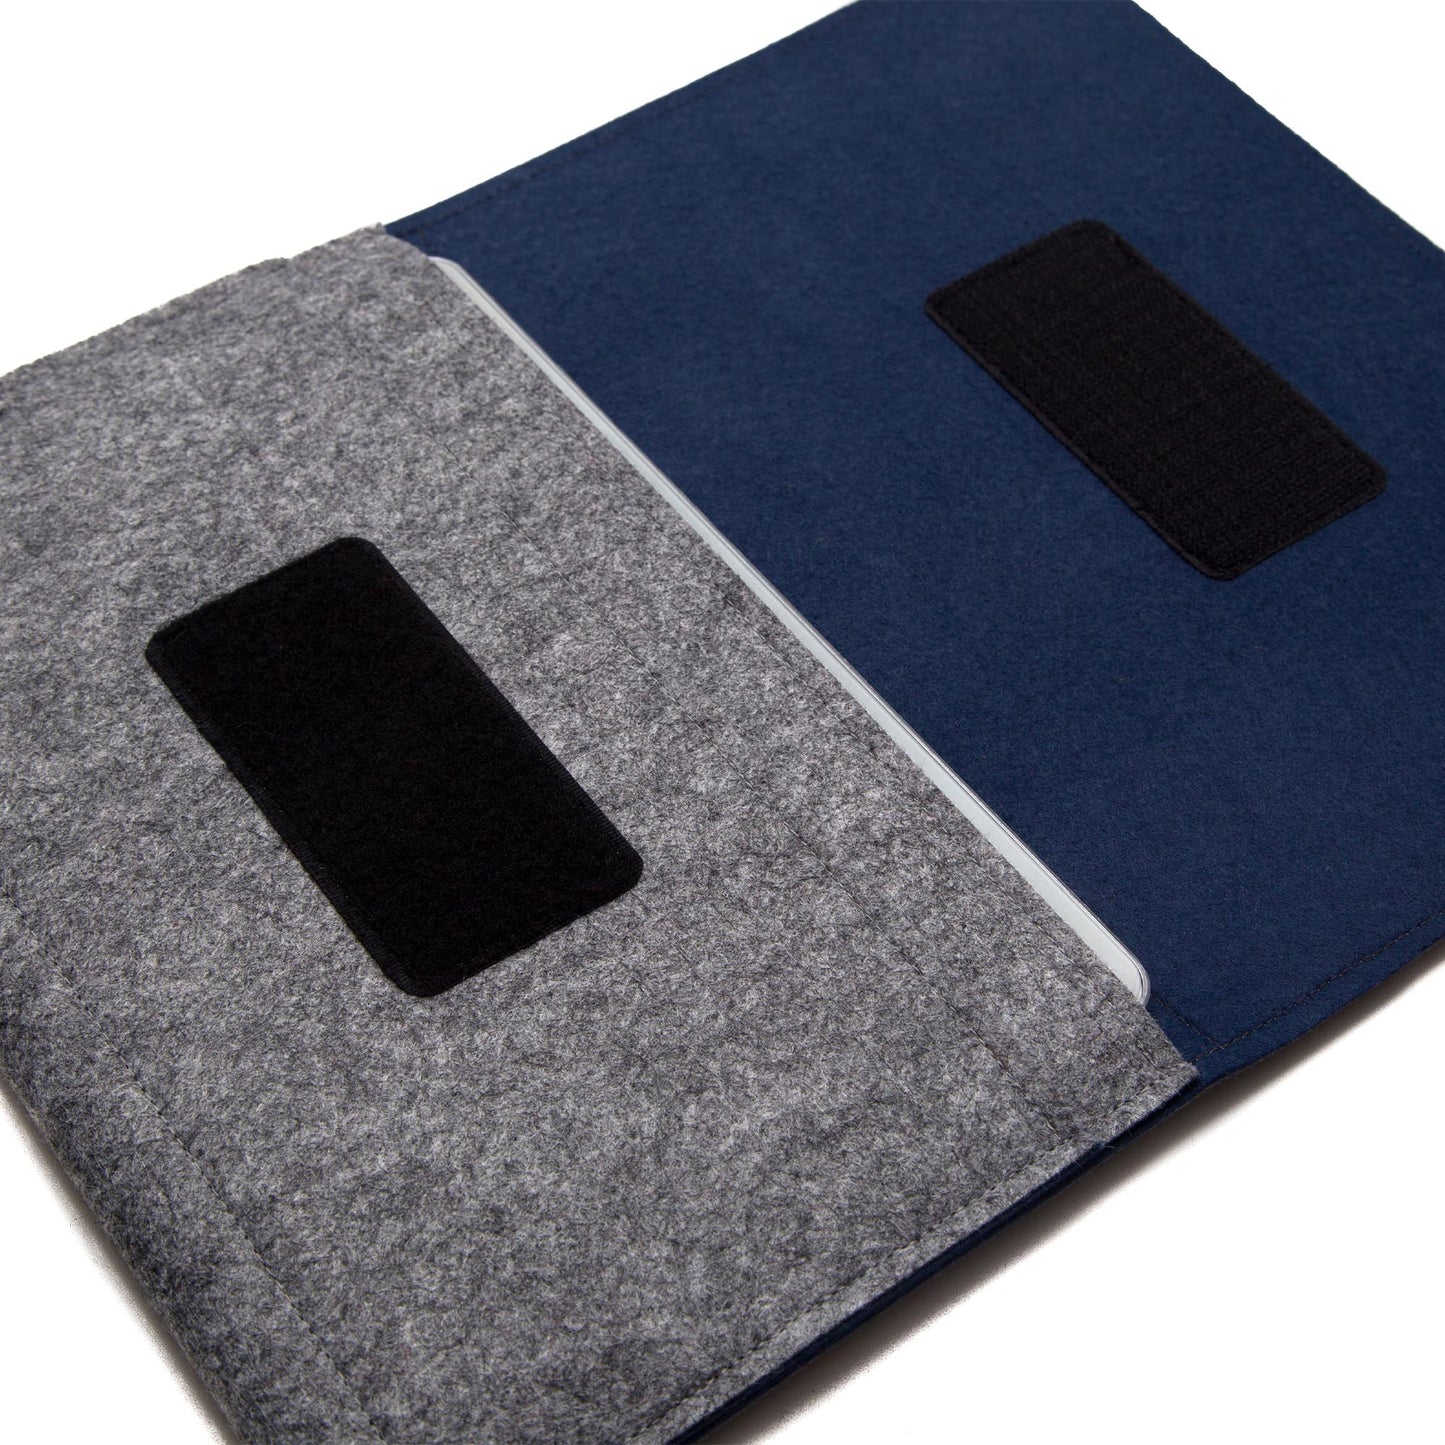 Premium Felt iPad Cover: Ultimate Protection with Accessories Pocket - Grey & Navy Blue